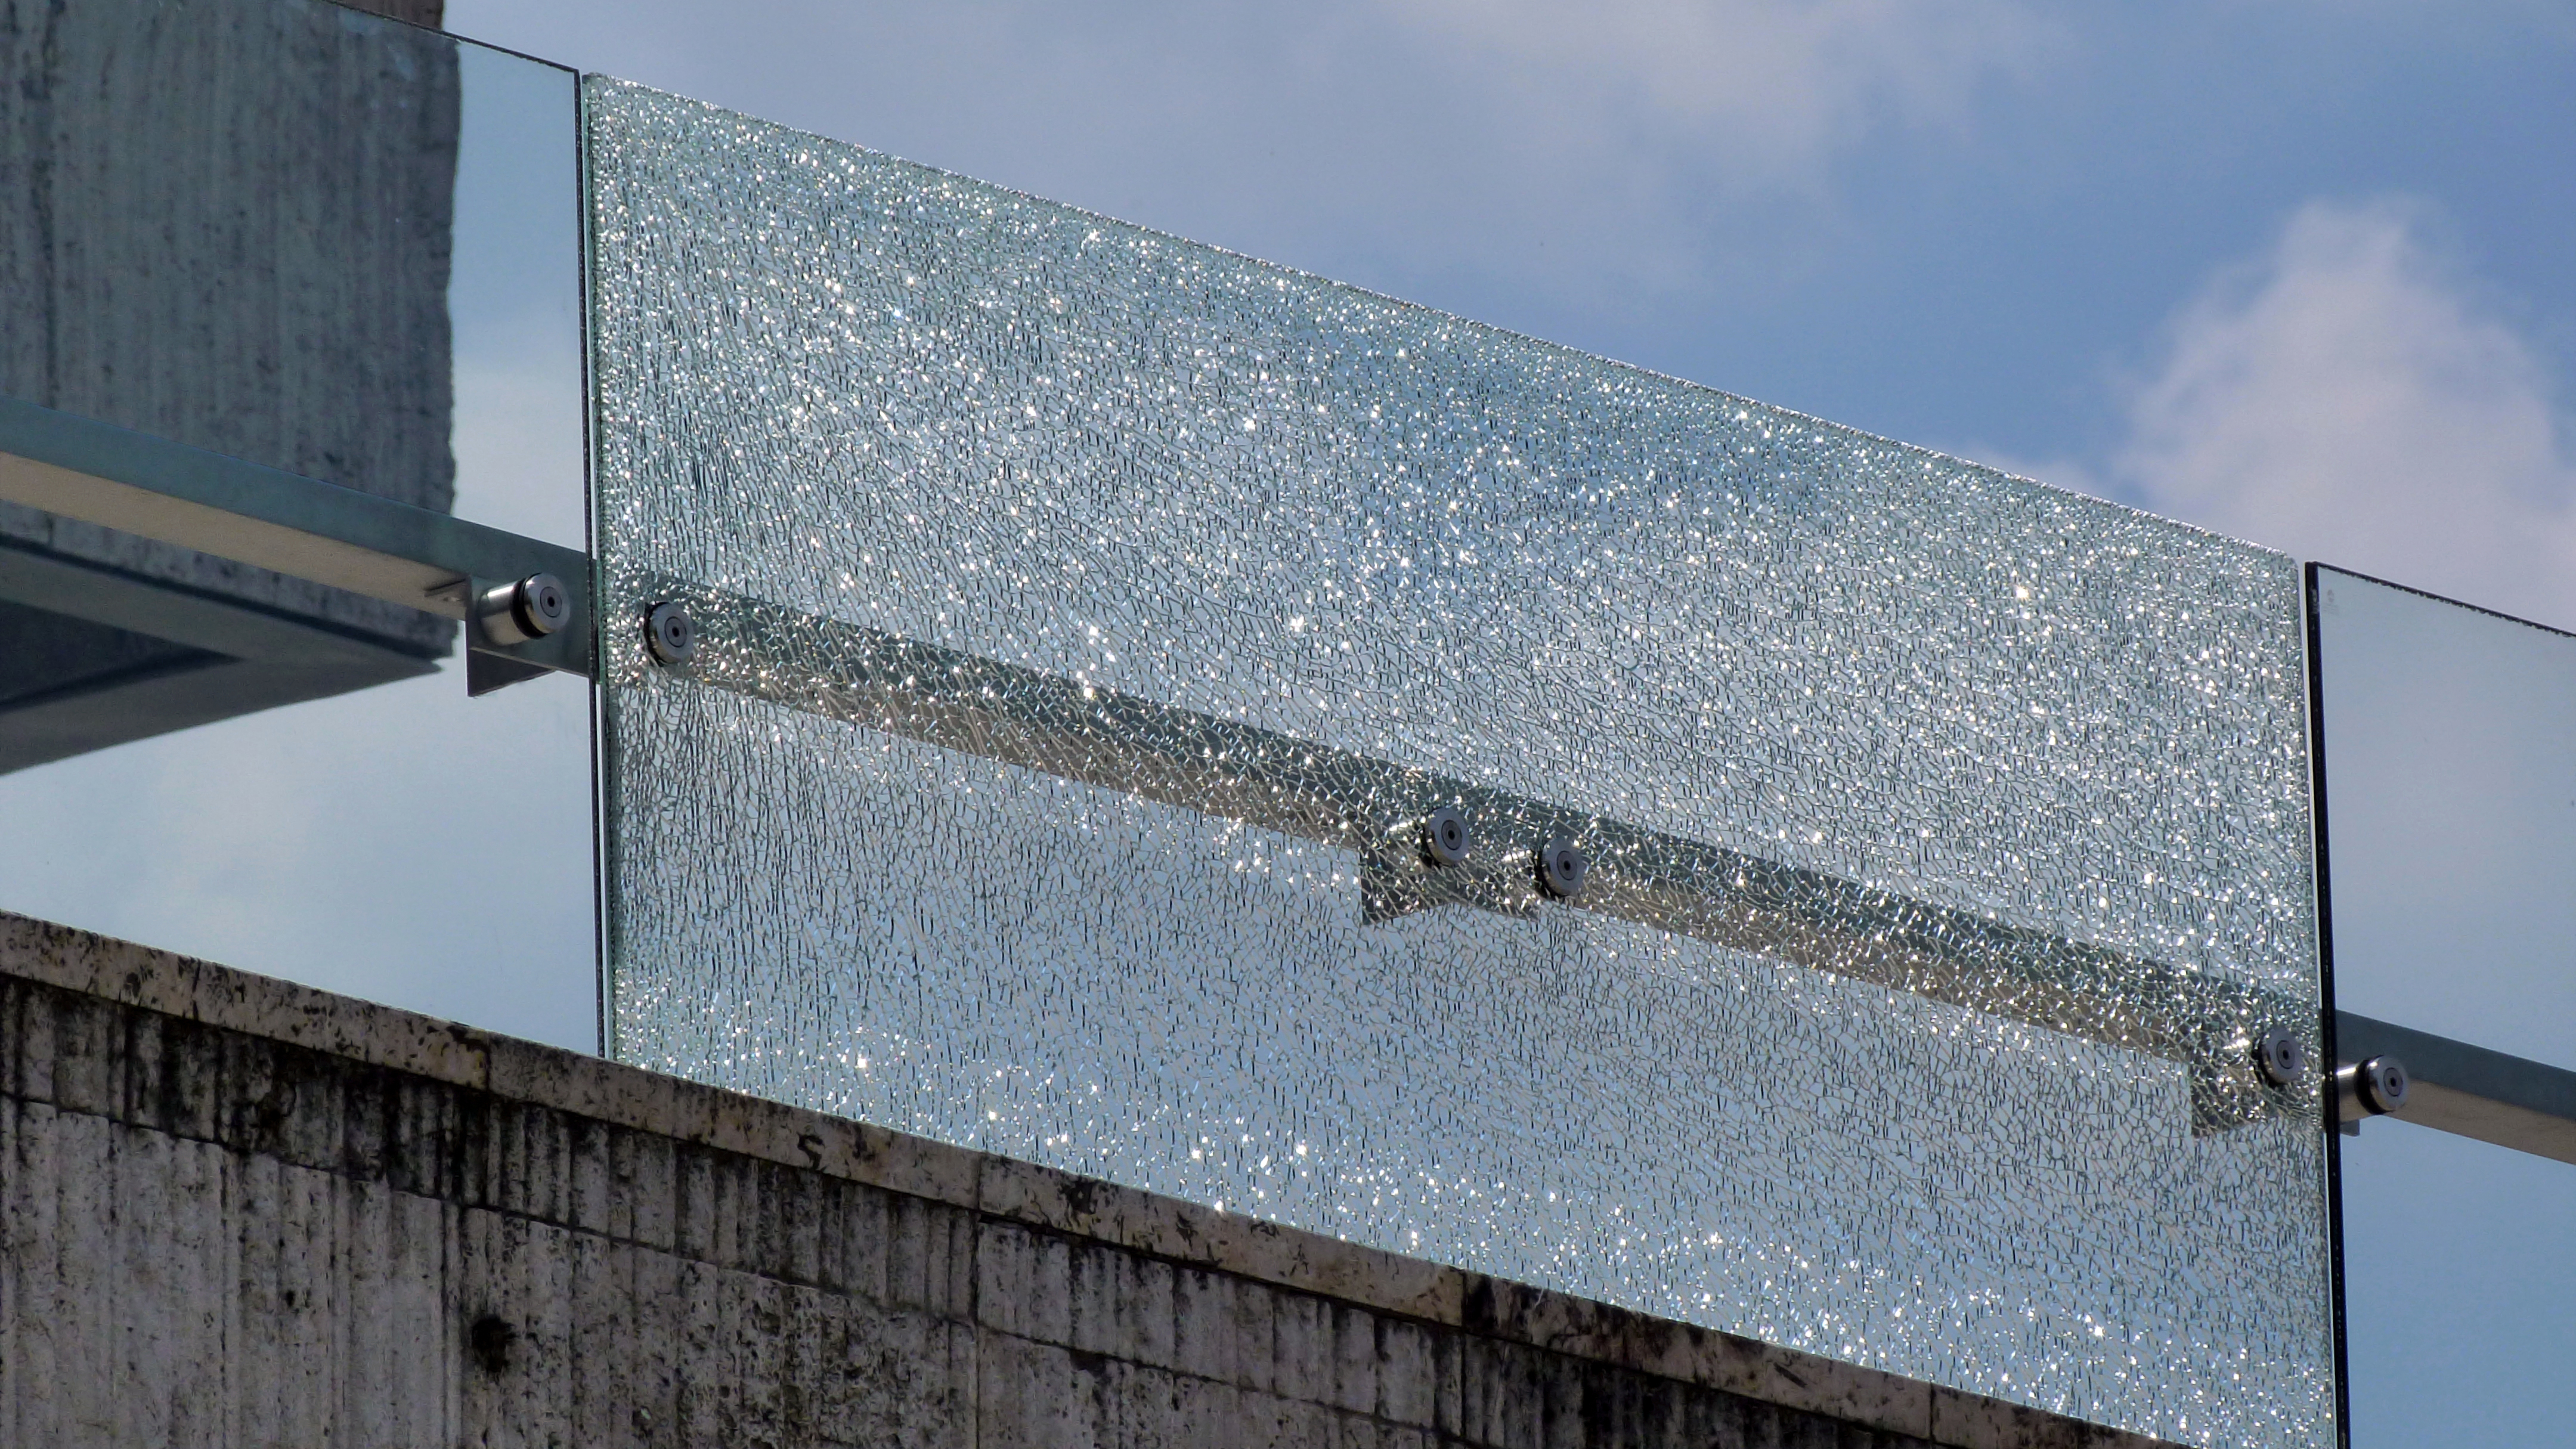 Image of shattered glass on a balcony panel on a concrete building, against blue sky